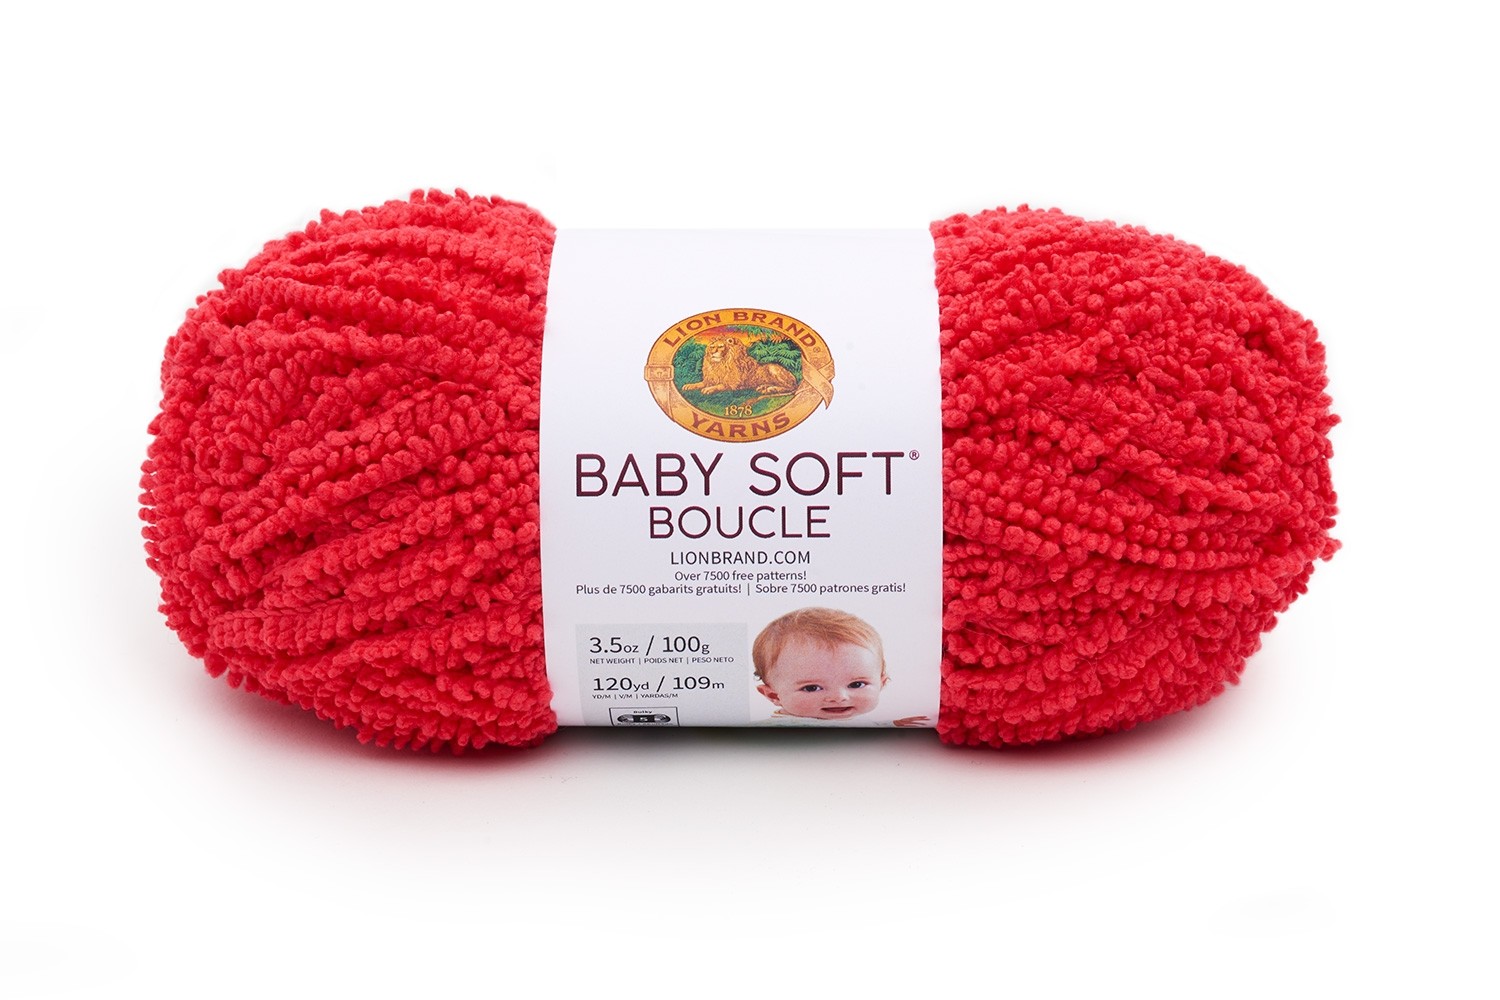 Baby Soft Boucle Scarlet